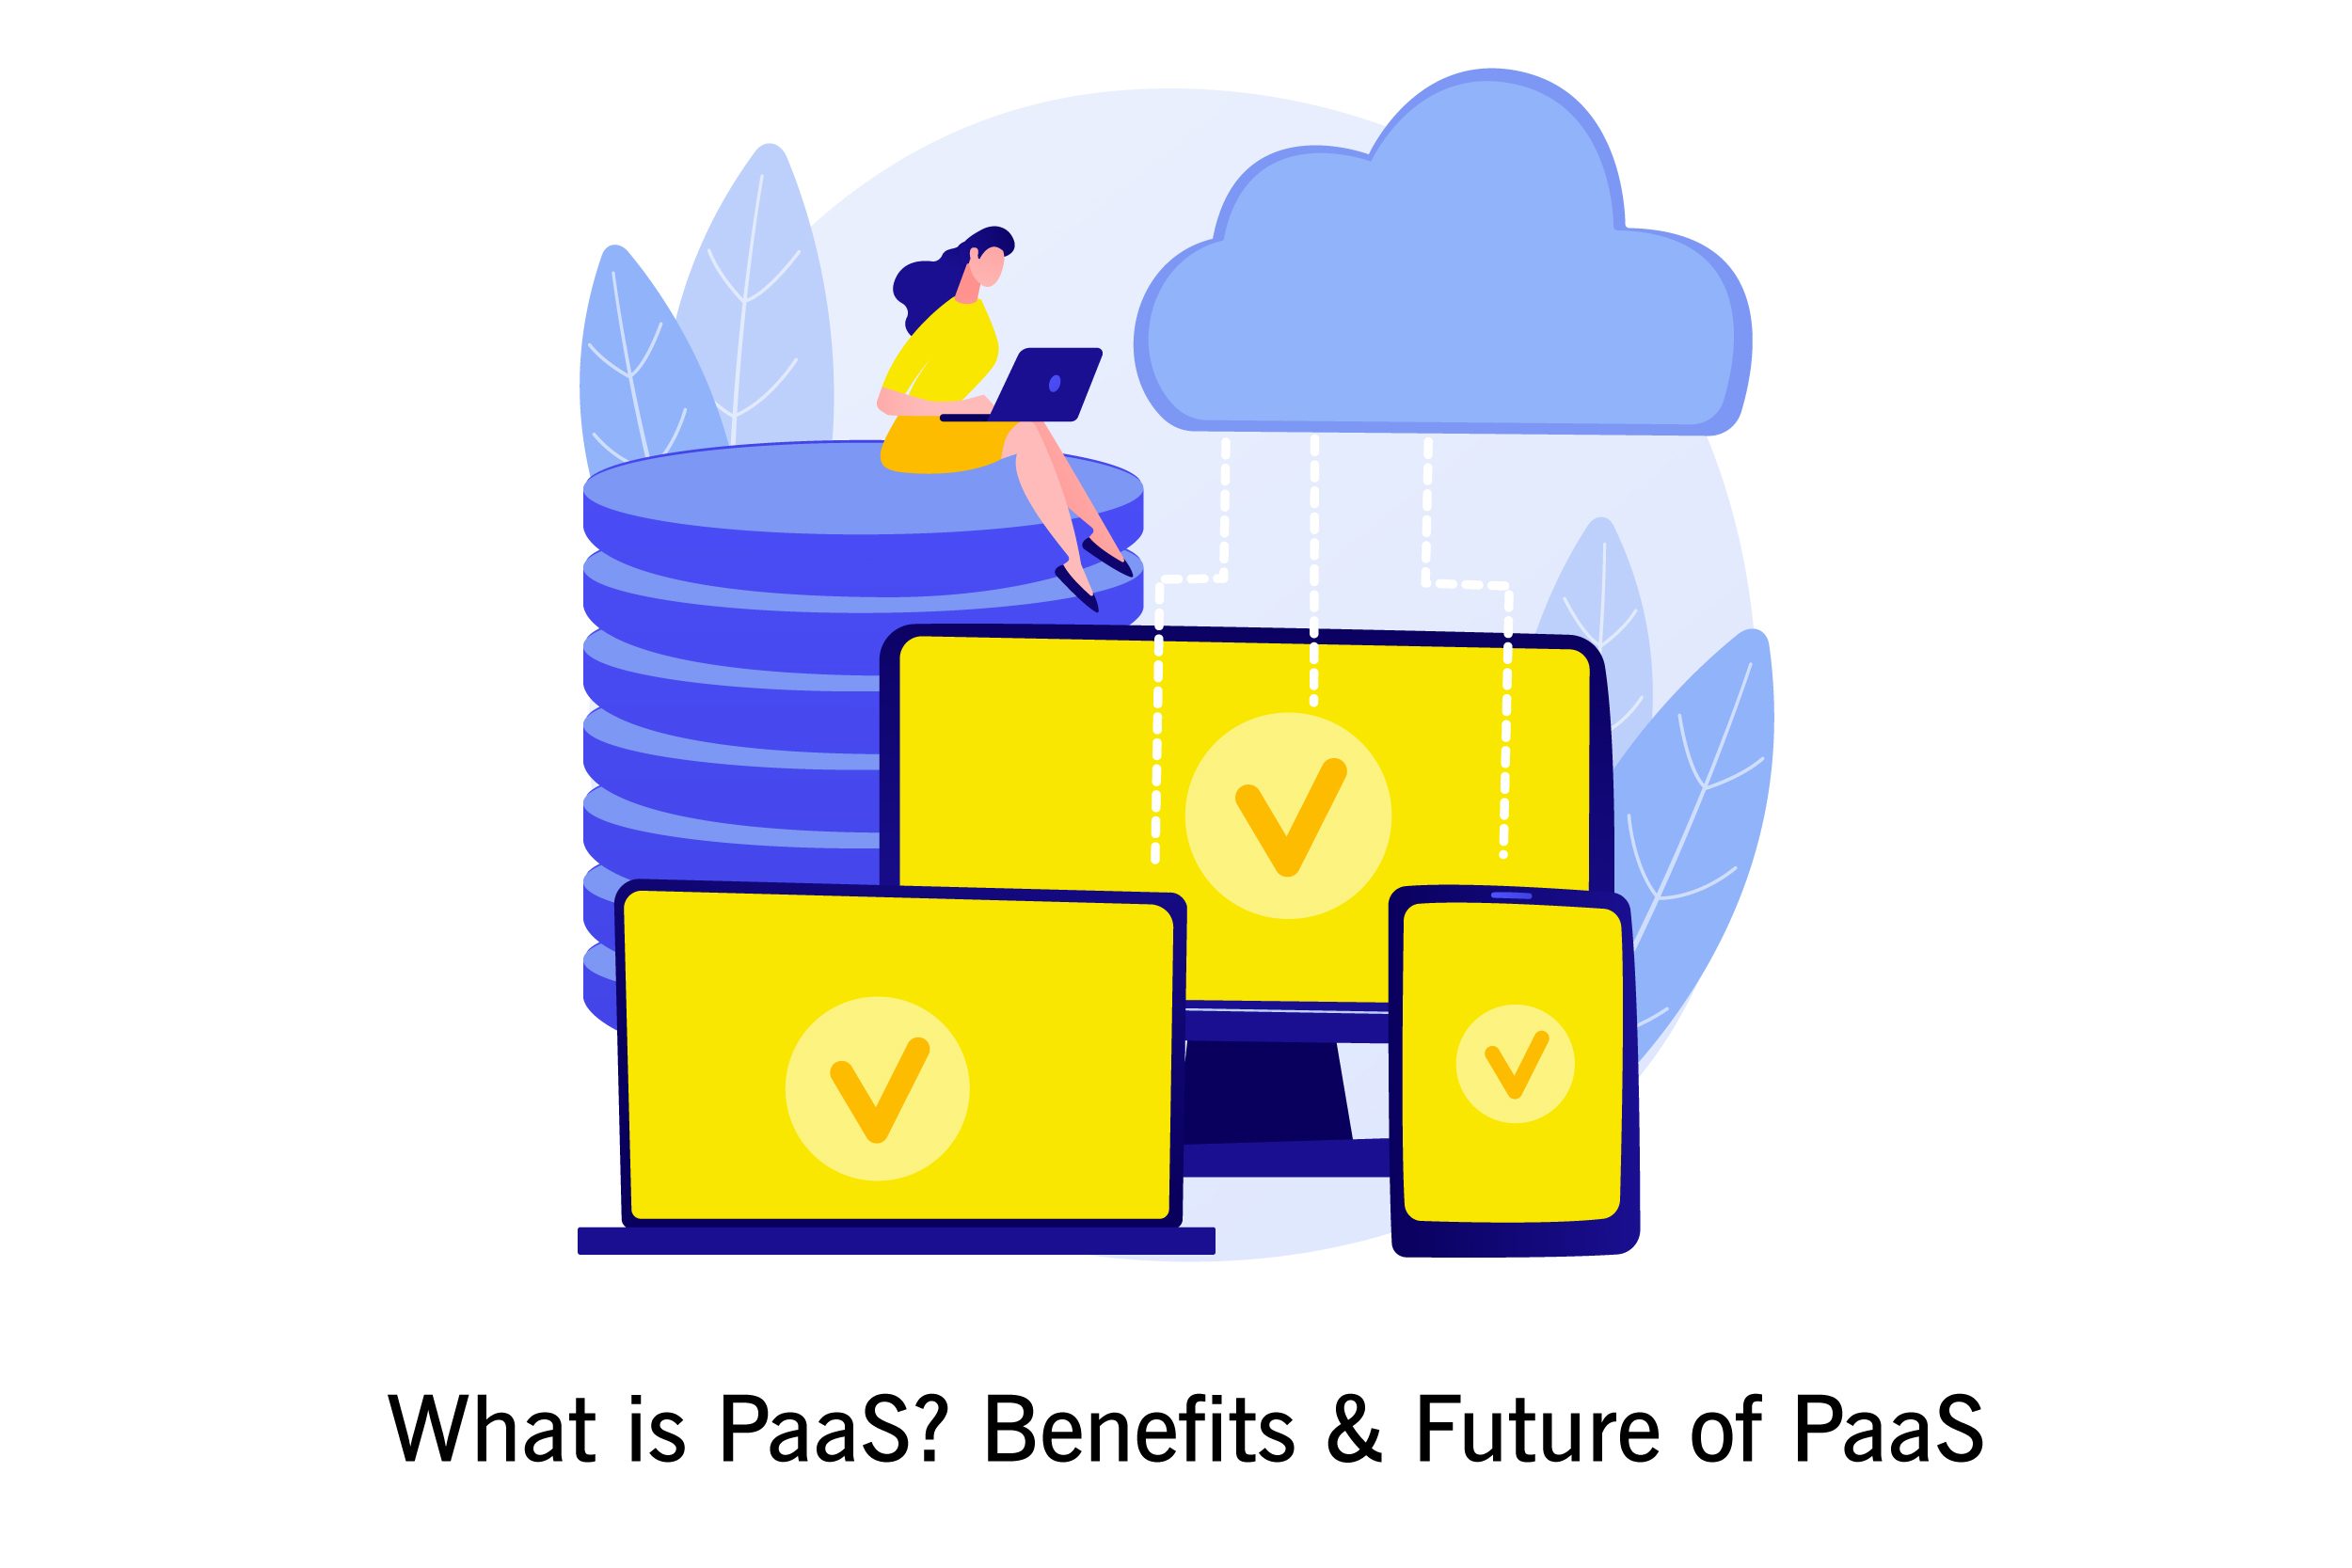 What is Platform as a Service (PaaS)? Benefits & Future of PaaS